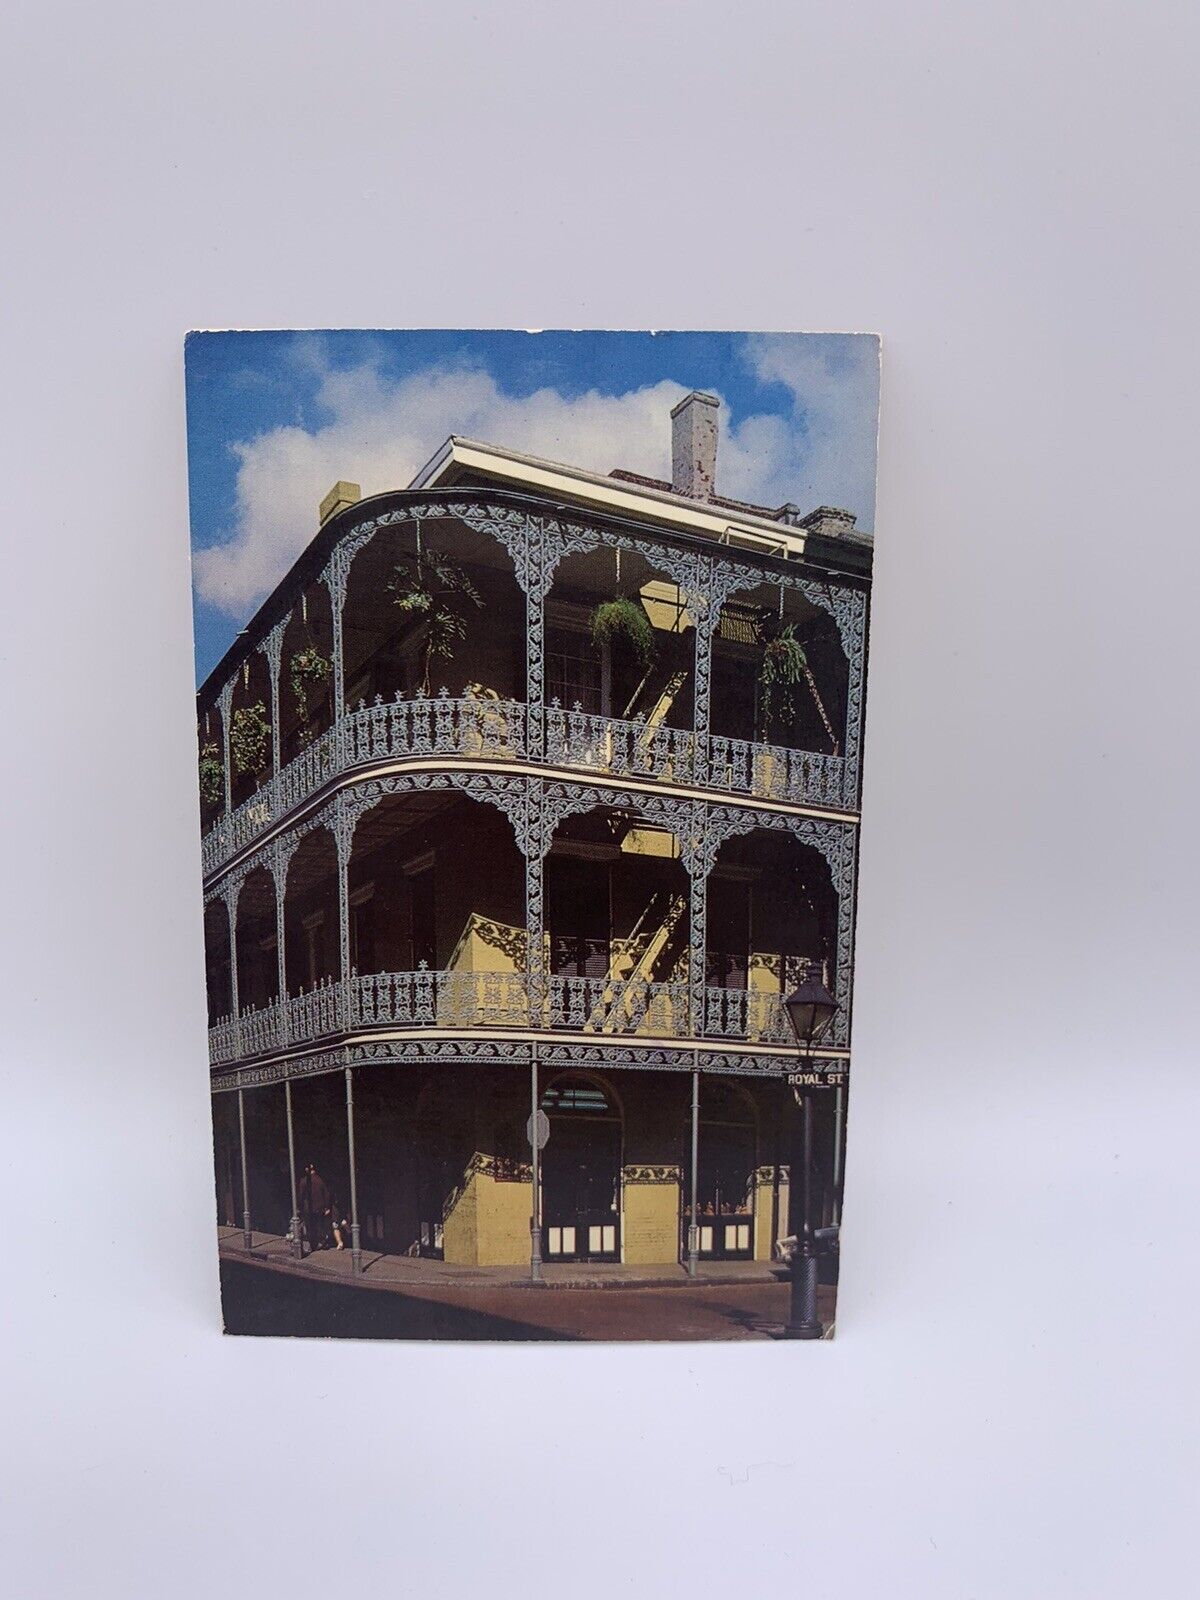 VTG USED Lace Balconies 700 Royal Street New Orleans Louisiana Postcard South